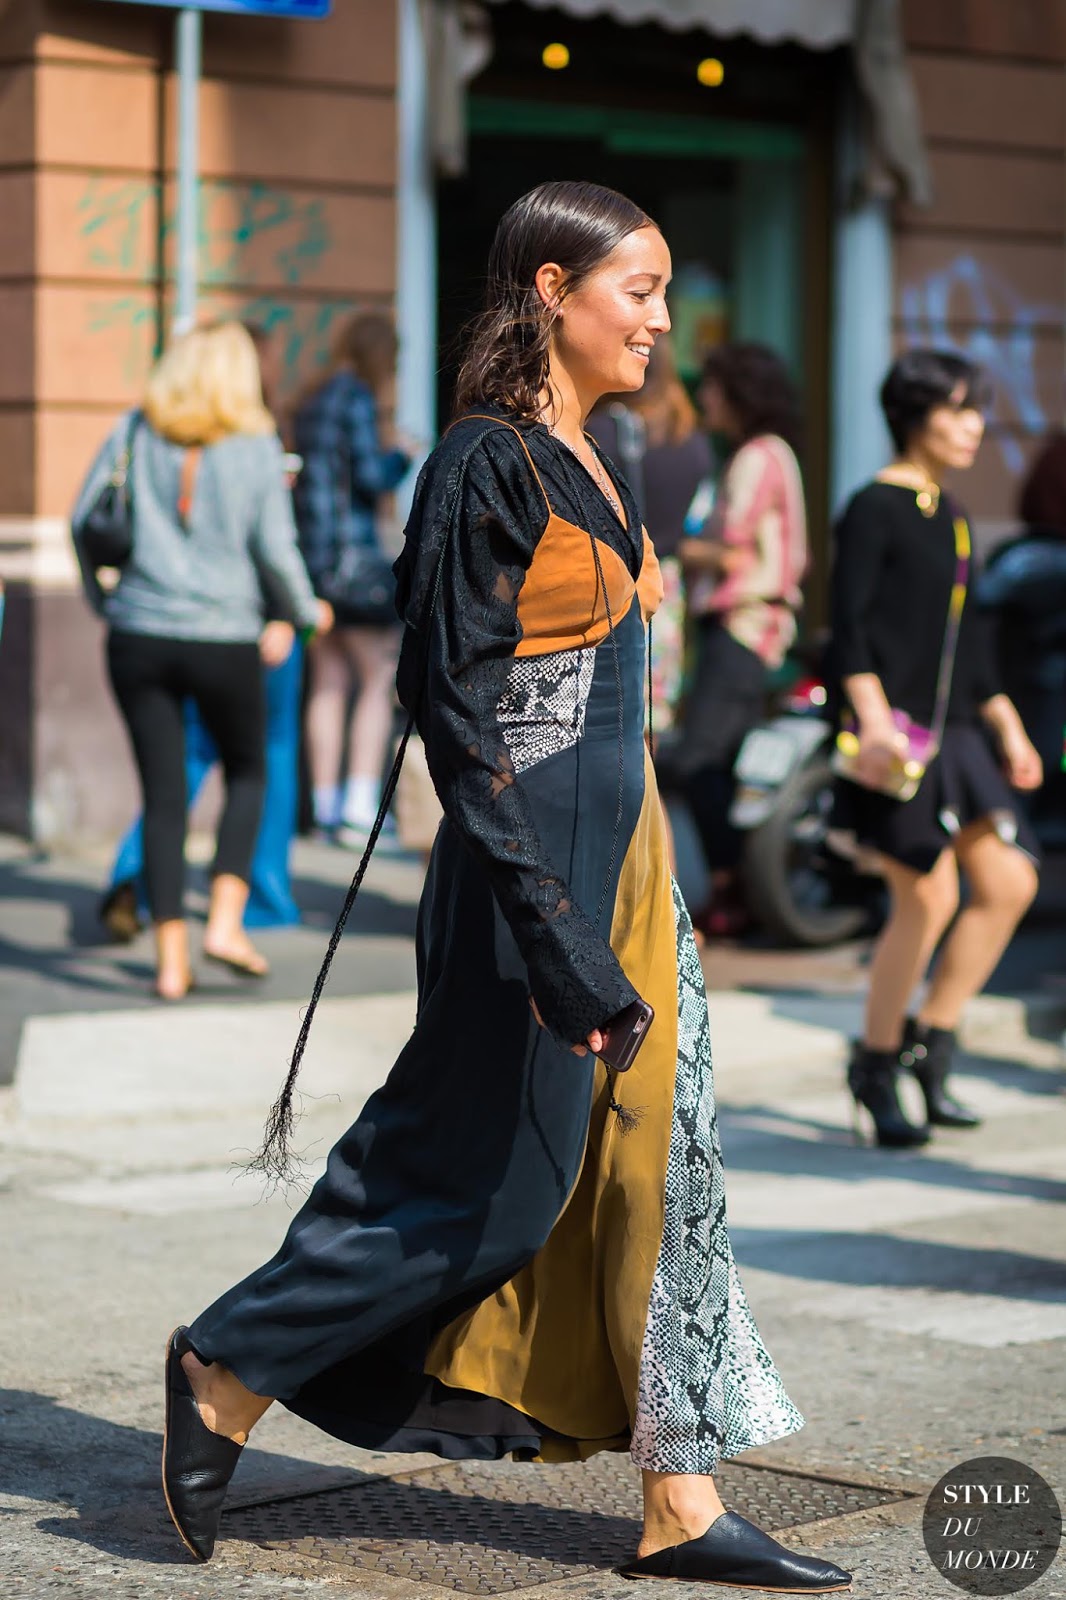 The Street Style Way to Wear a Slip Dress for Fall